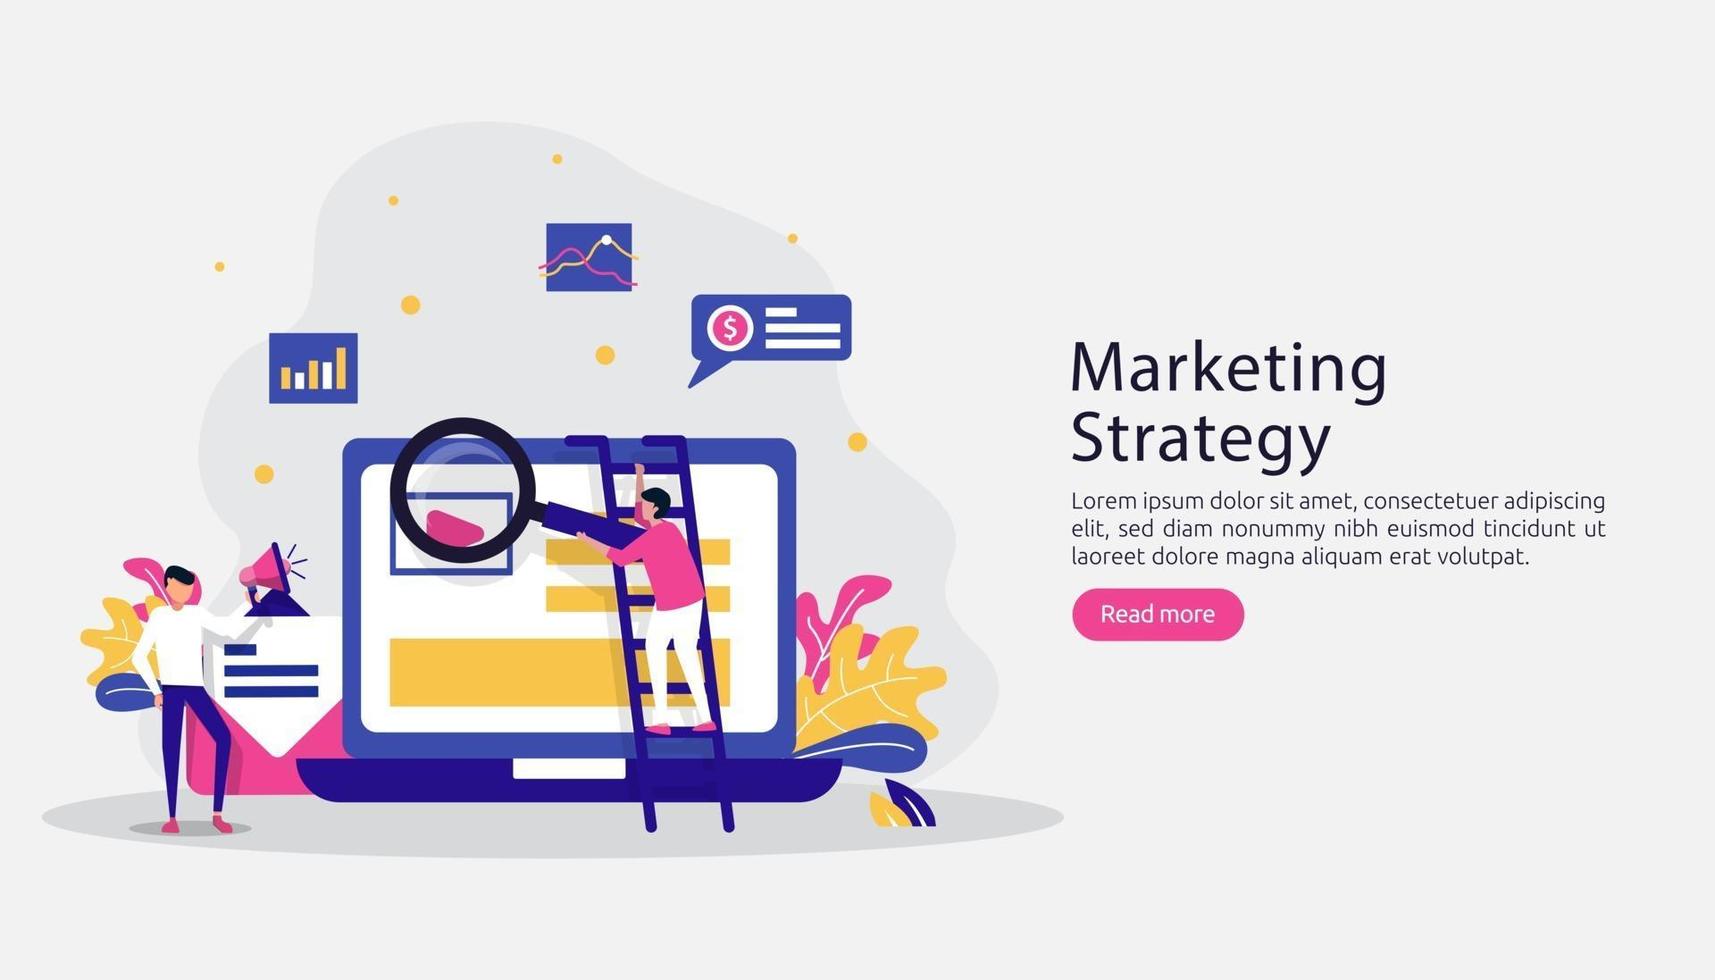 affiliate digital marketing strategy concept. refer a friend with people character sharing referral business partnership and earn money online. template for web landing page, banner, presentation vector